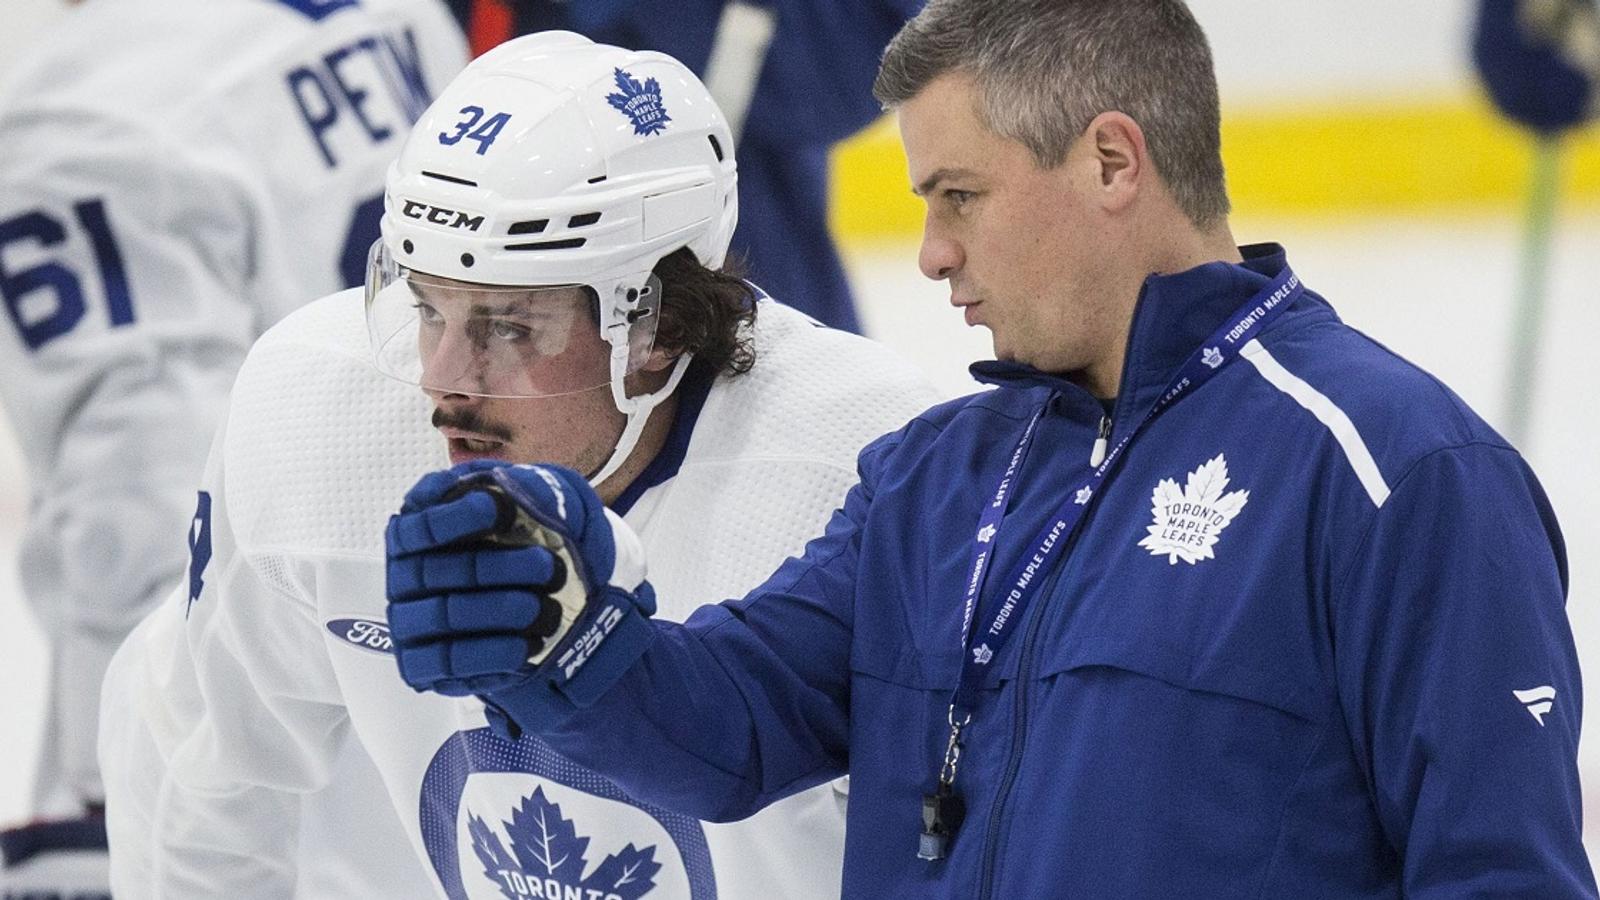 Maple Leaf leaves practice in Sweden early due to injury.